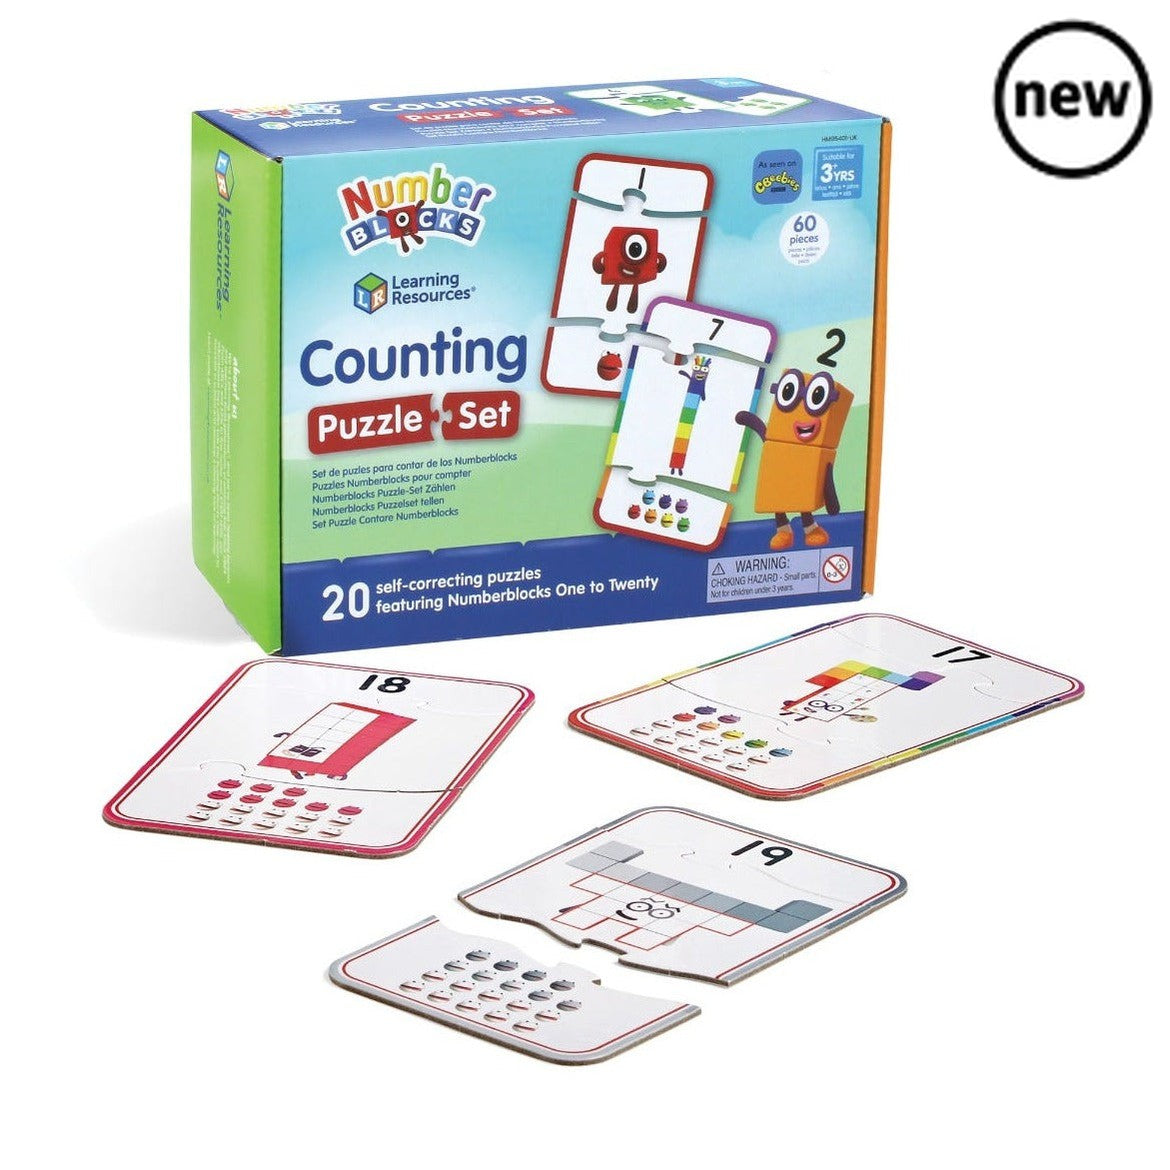 Numberblocks Counting Puzzle Set, This first Numberblocks Counting Puzzle Set helps little ones learn counting 1–20 through fun puzzle play. As children assemble the chunky, durable puzzle pieces, they’ll be counting the Numberblocks and Numberblobs, identifying each Numberblock’s Numberling, and building colour recognition and fine motor skills along the way. Each clever self-correcting Numberblocks puzzle fits together in a unique way, which means there’s only one right answer. This gives little ones a fe